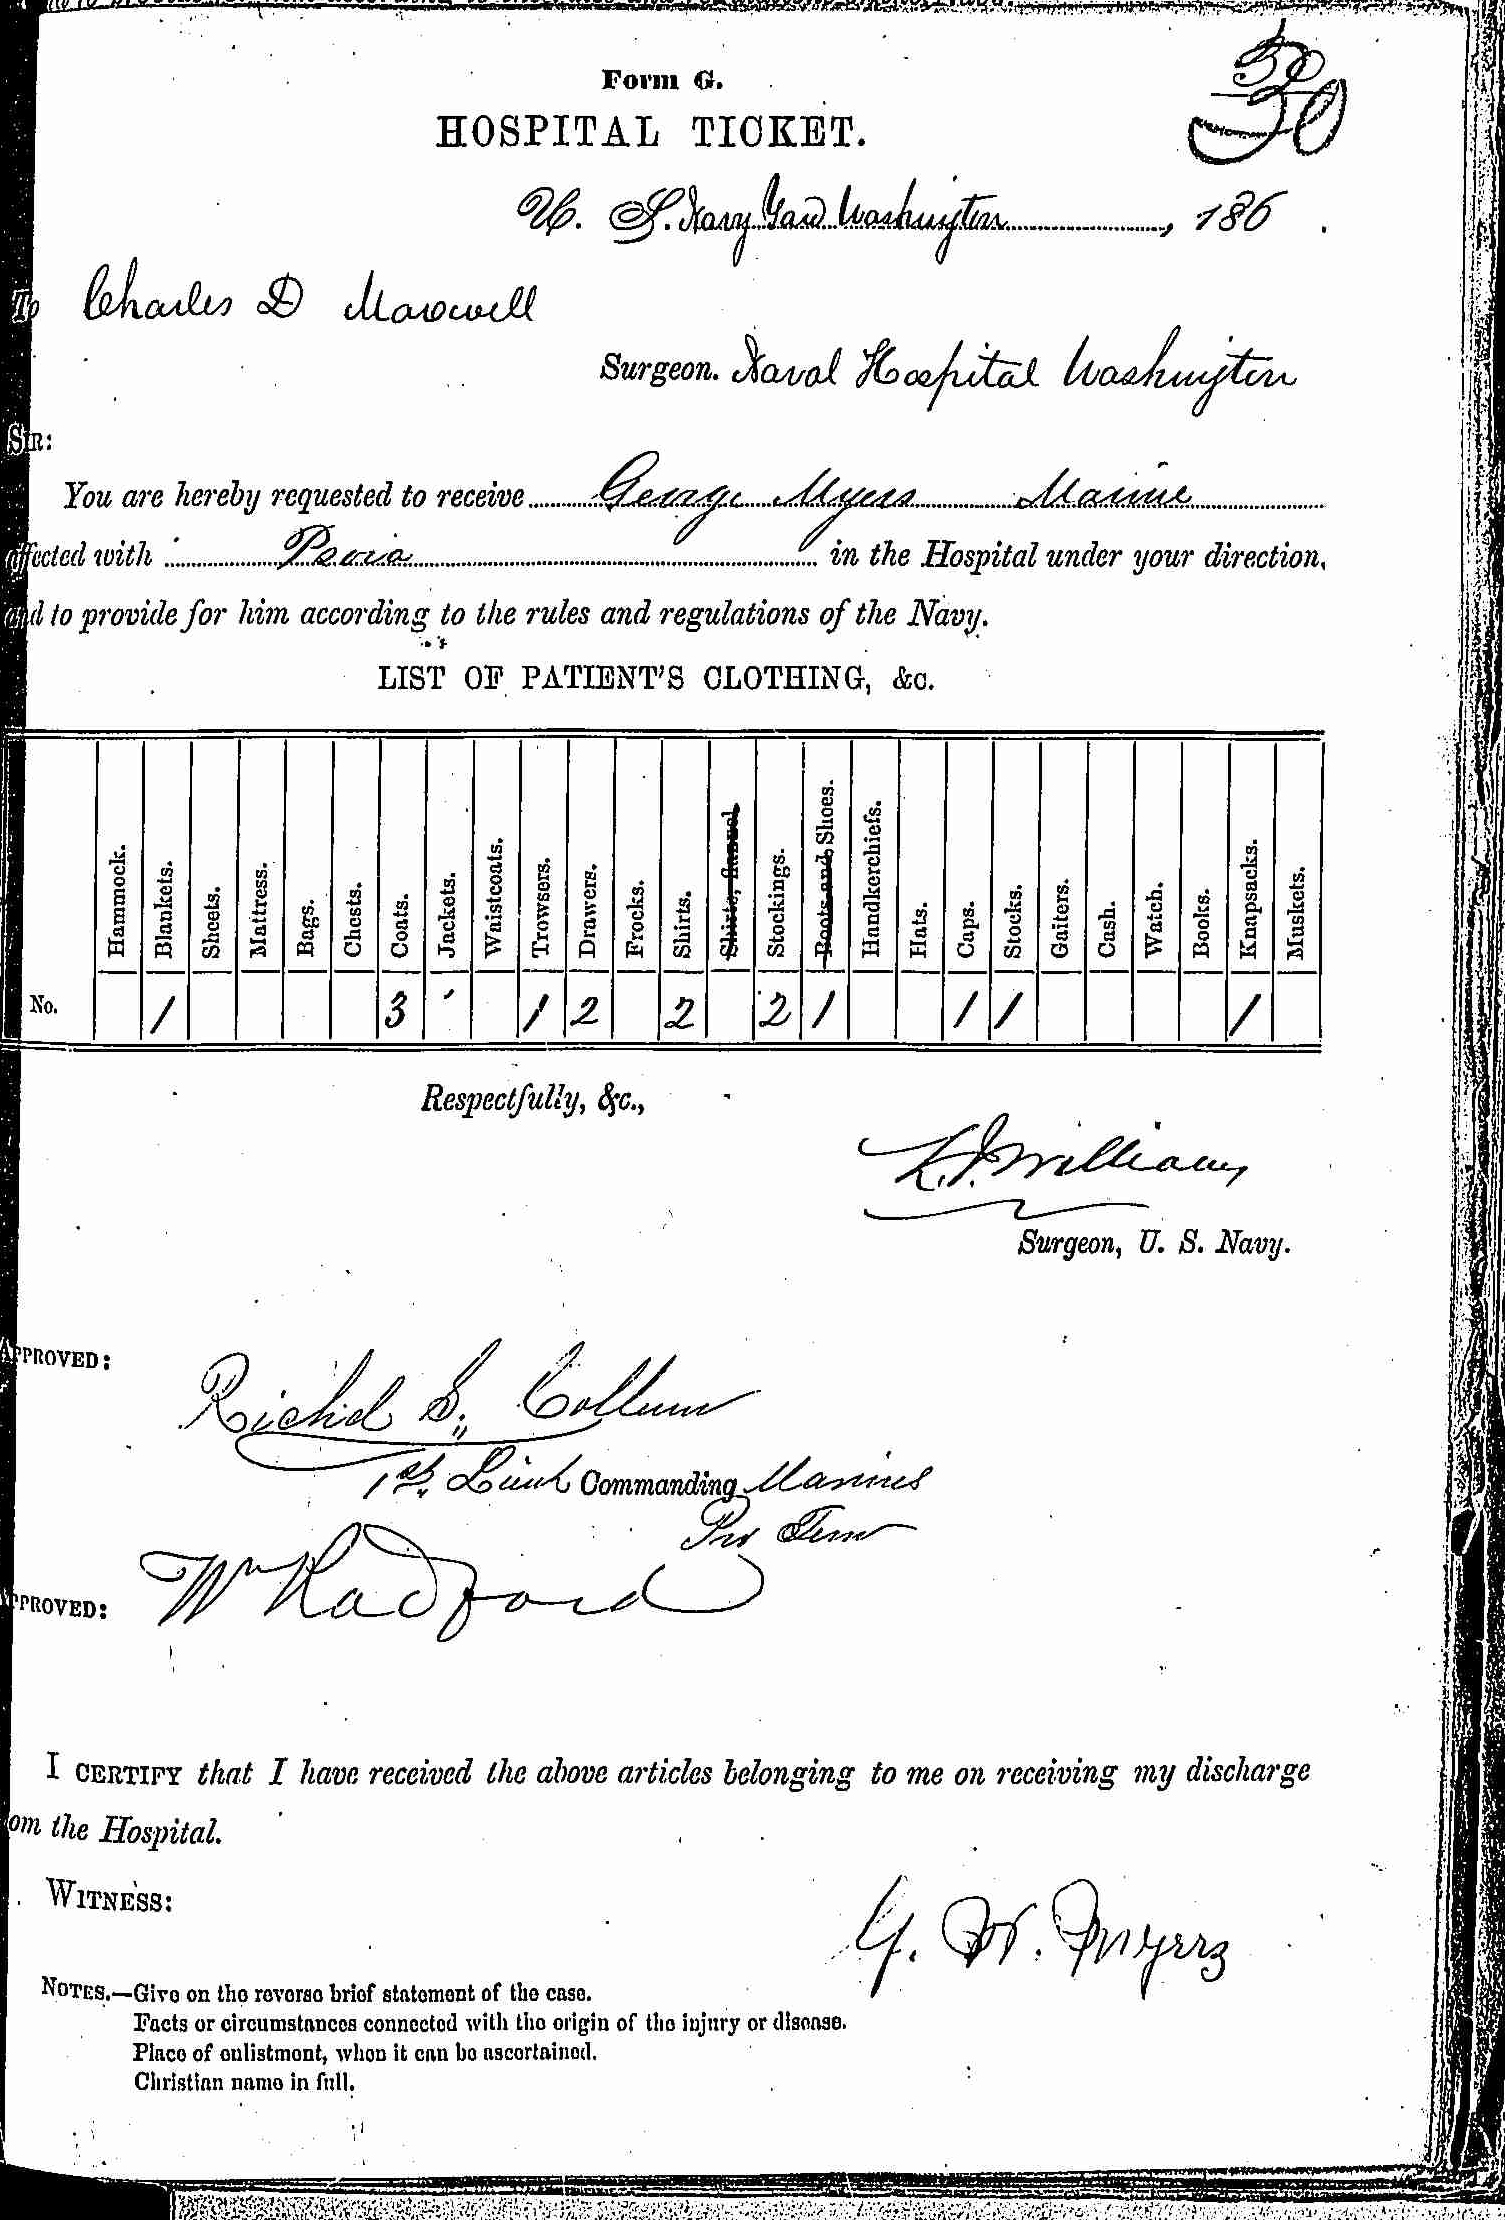 Entry for George Myers (page 1 of 2) in the log Hospital Tickets and Case Papers - Naval Hospital - Washington, D.C. - 1865-68